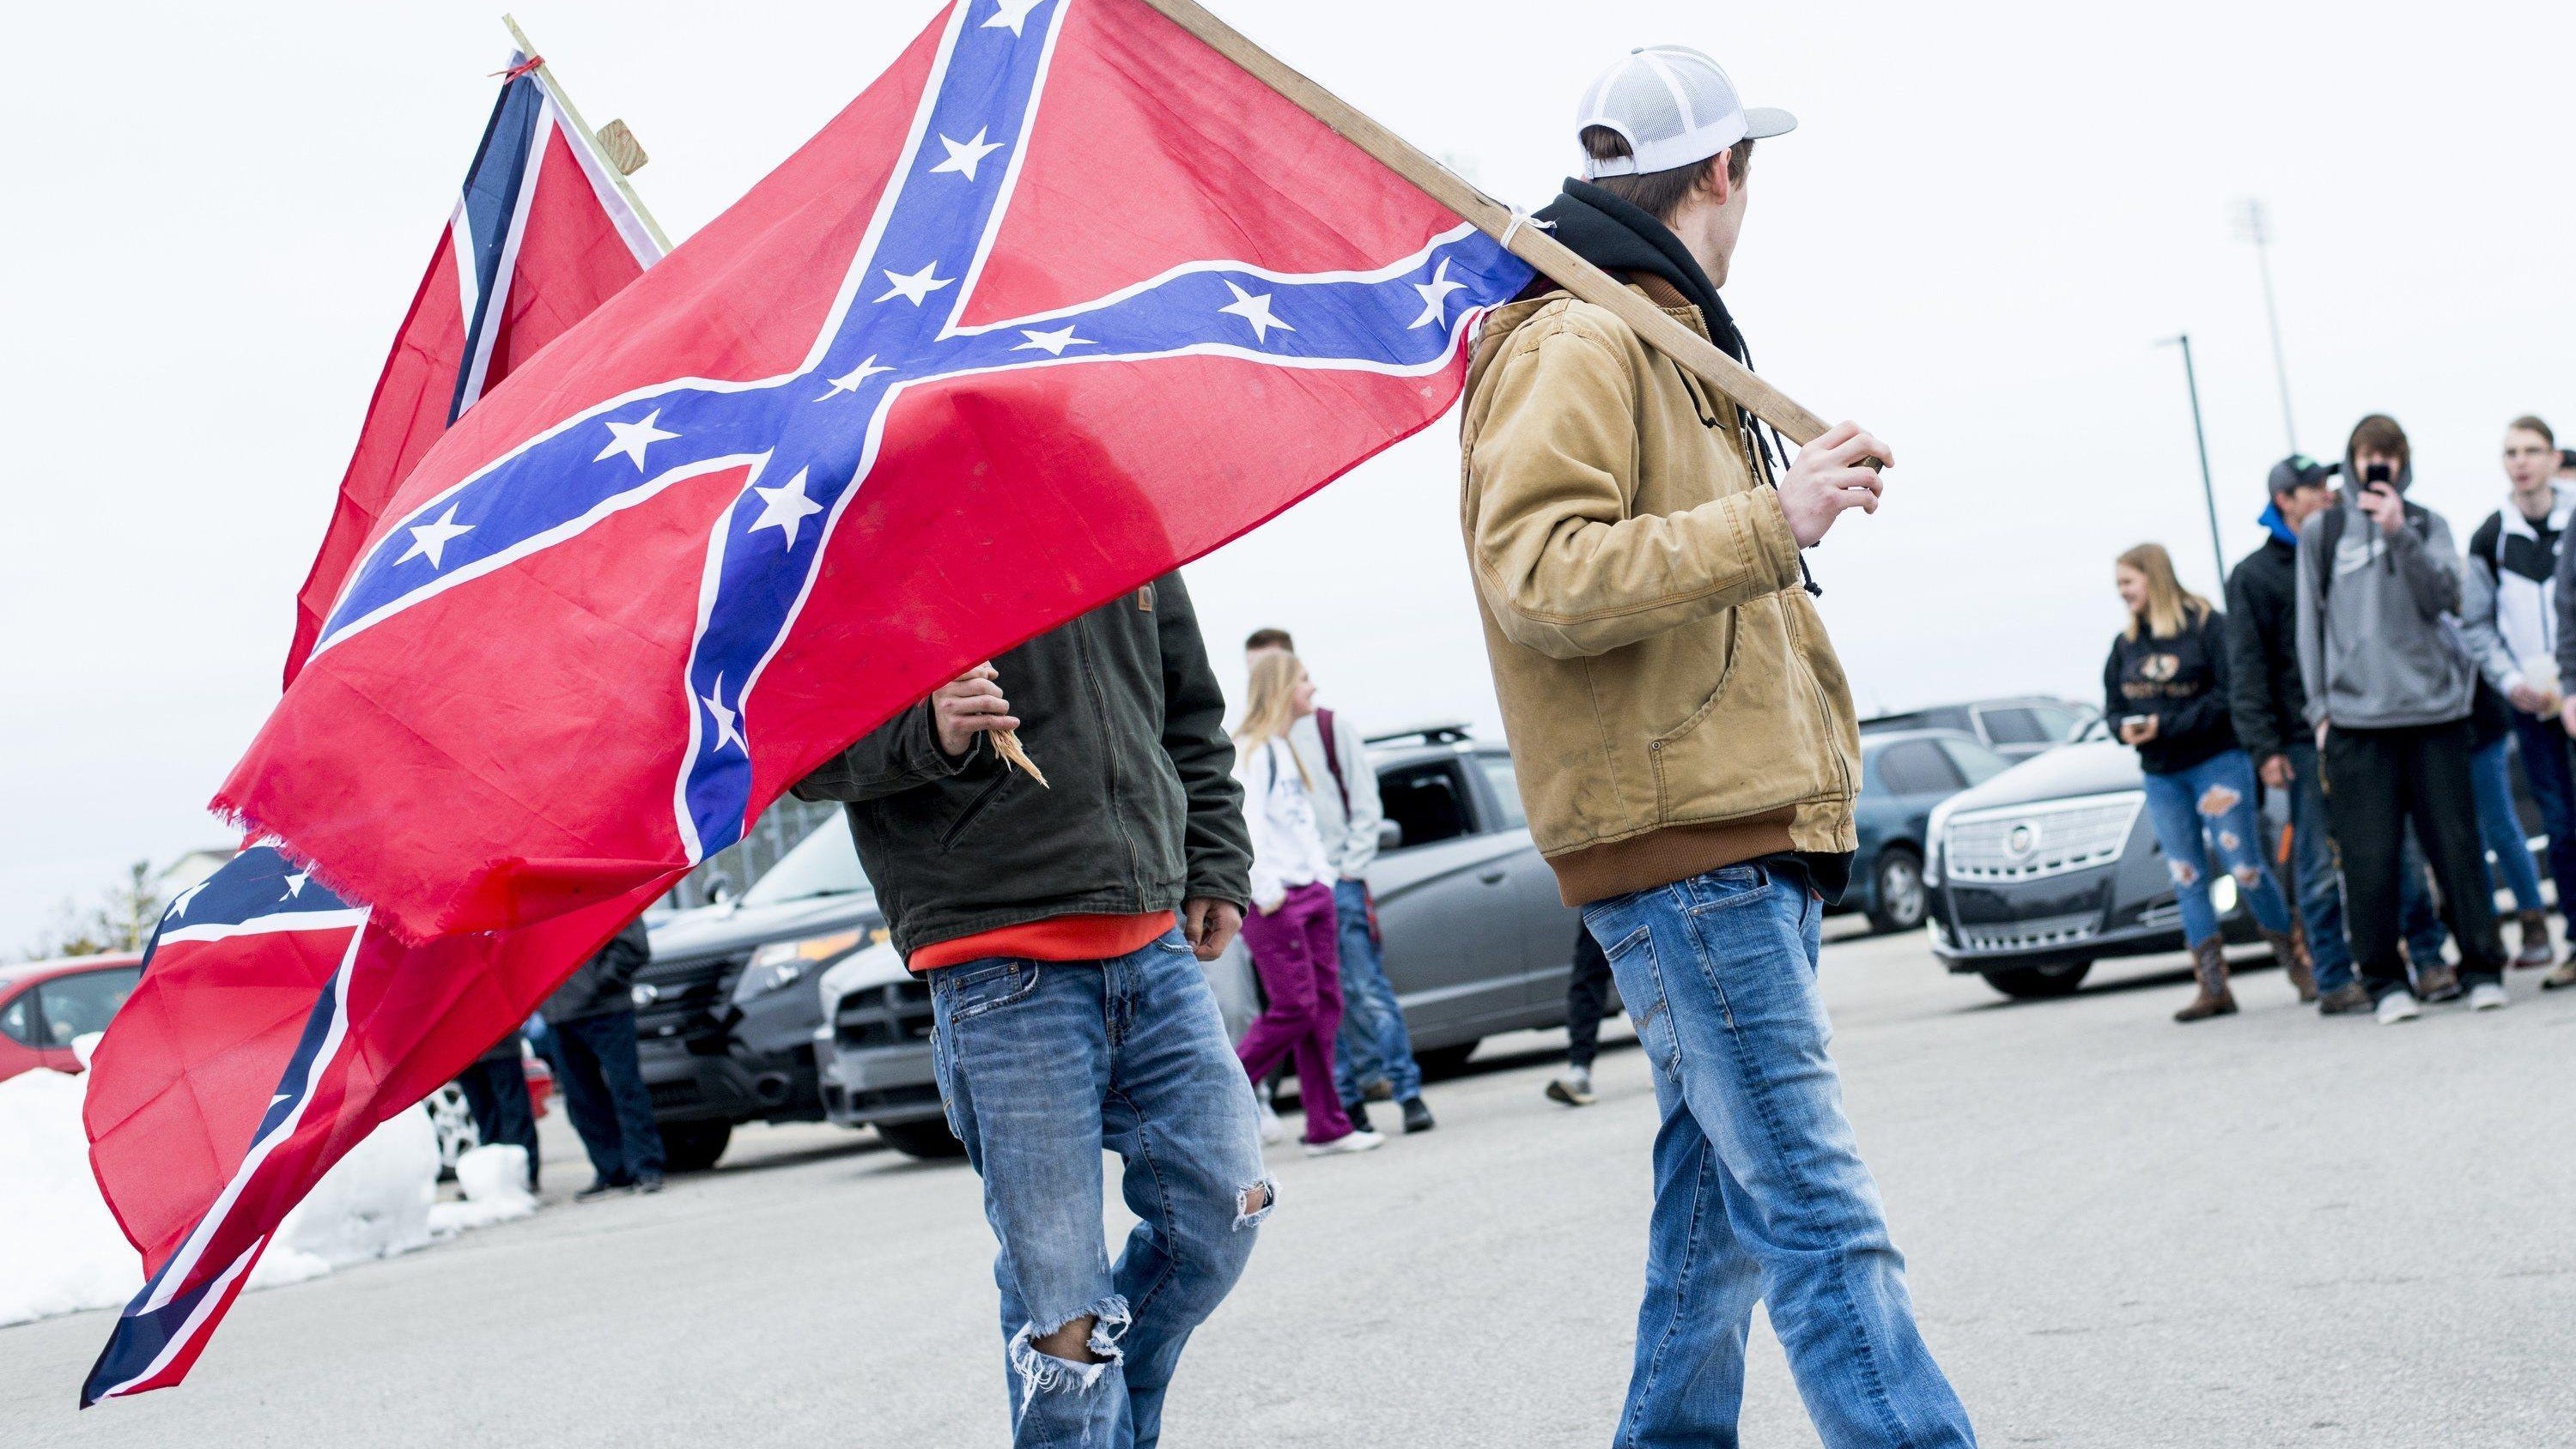 Students demonstrate in support of a Bay City Western High School student, who claims his Confederate flag was torn from his truck last week, Wednesday, April 18 2018, in Auburn, Mich.